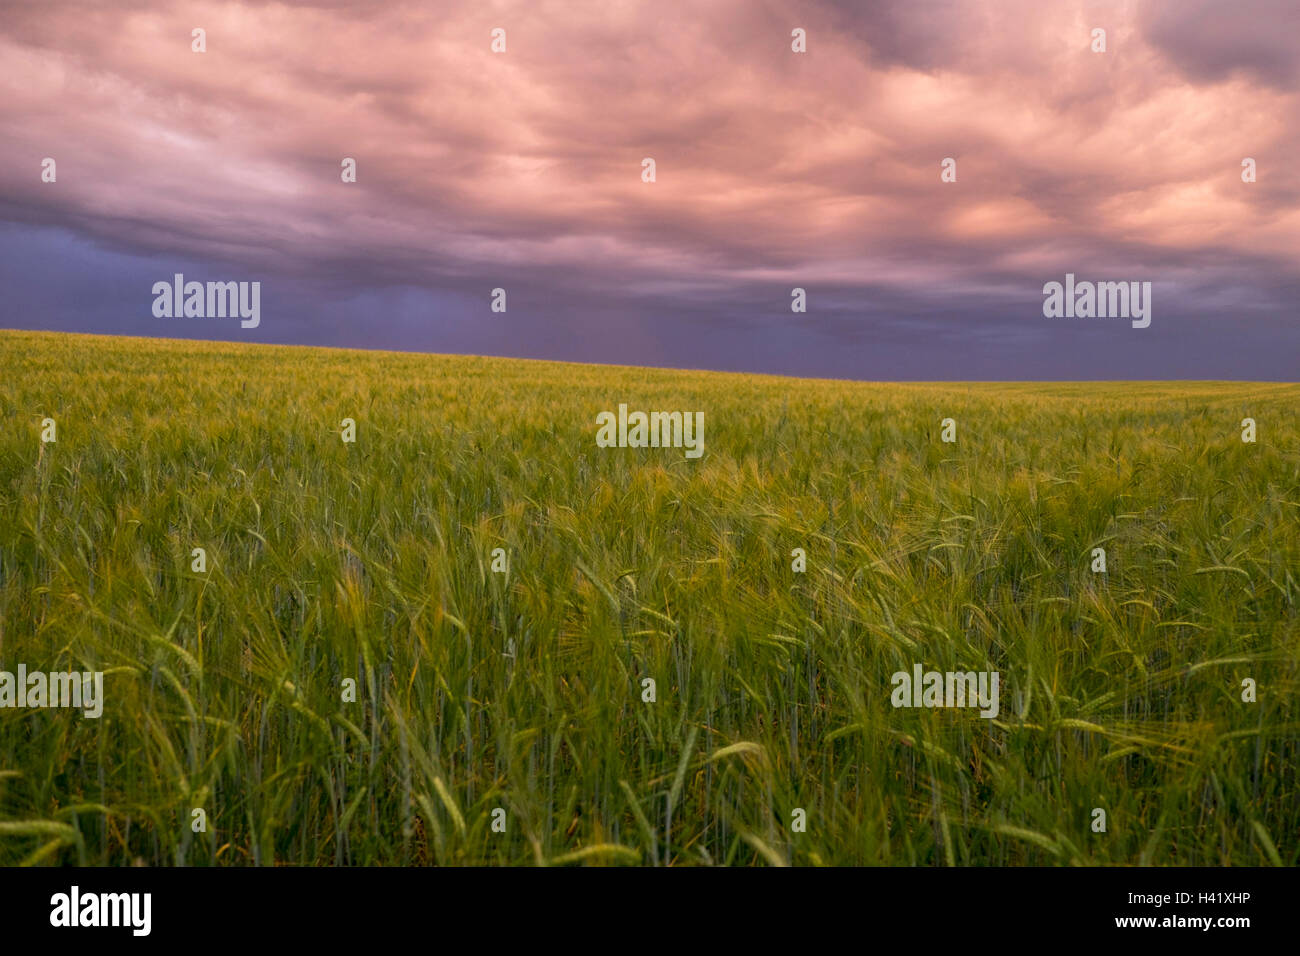 Storm clouds over field of tall grass Banque D'Images